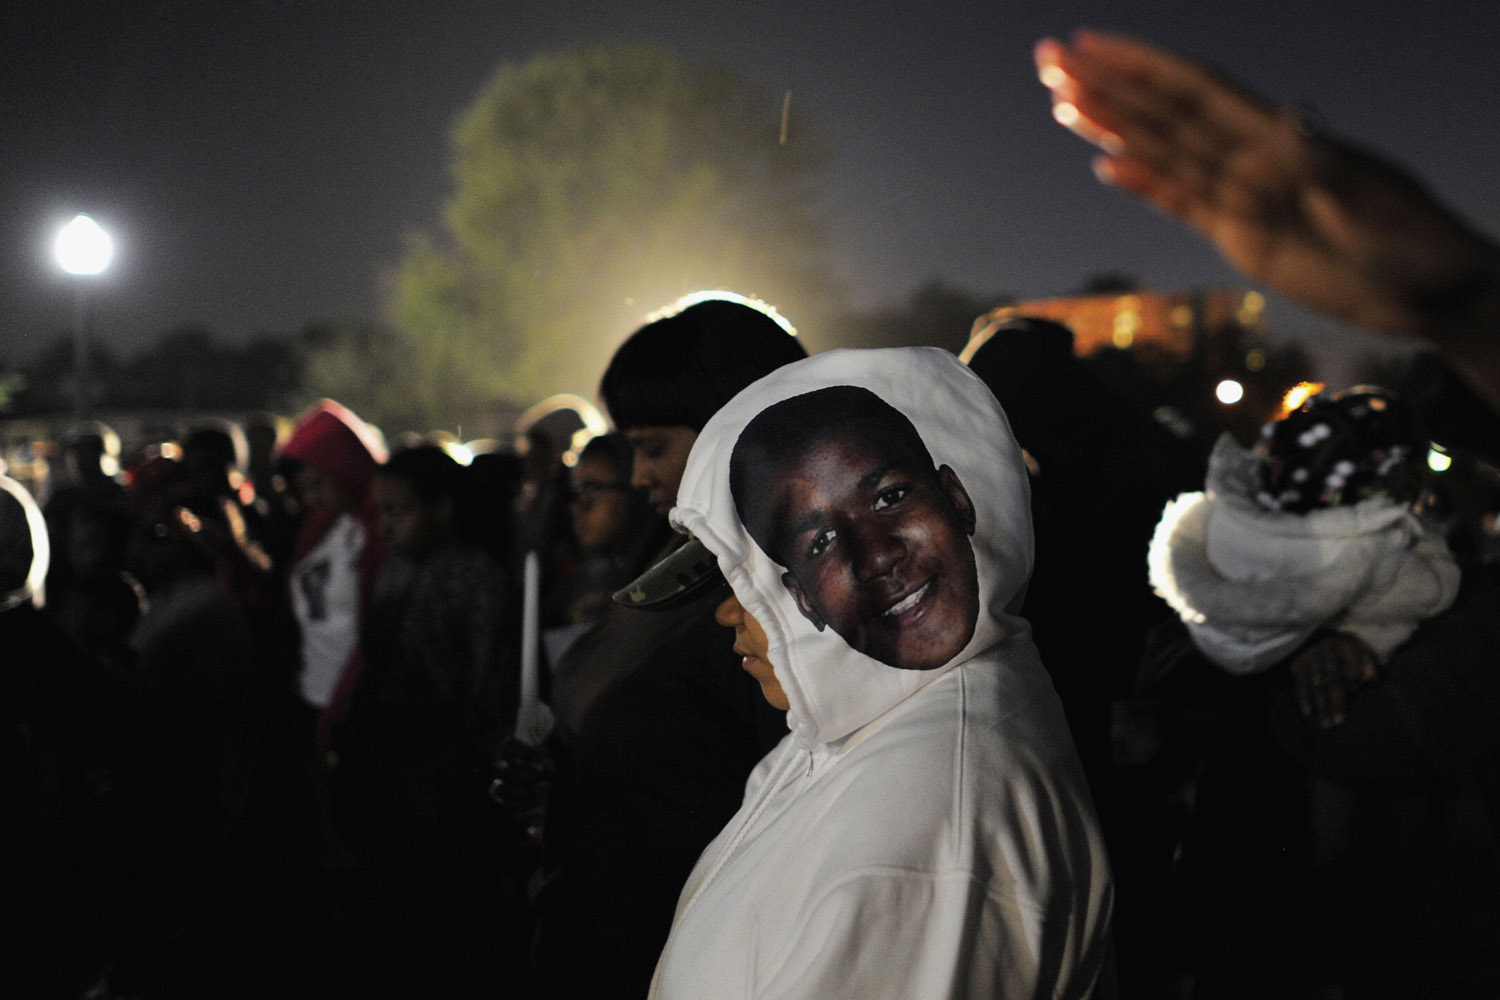 Feb. 26, 2013. A supporter wears a hooded sweatshirt with the face of teenager Trayvon Martin, as she joins other attendees in a candlelight vigil at the exact moment Martin was shot, one year ago, by neighborhood watch volunteer George Zimmerman in Sanford, Florida.